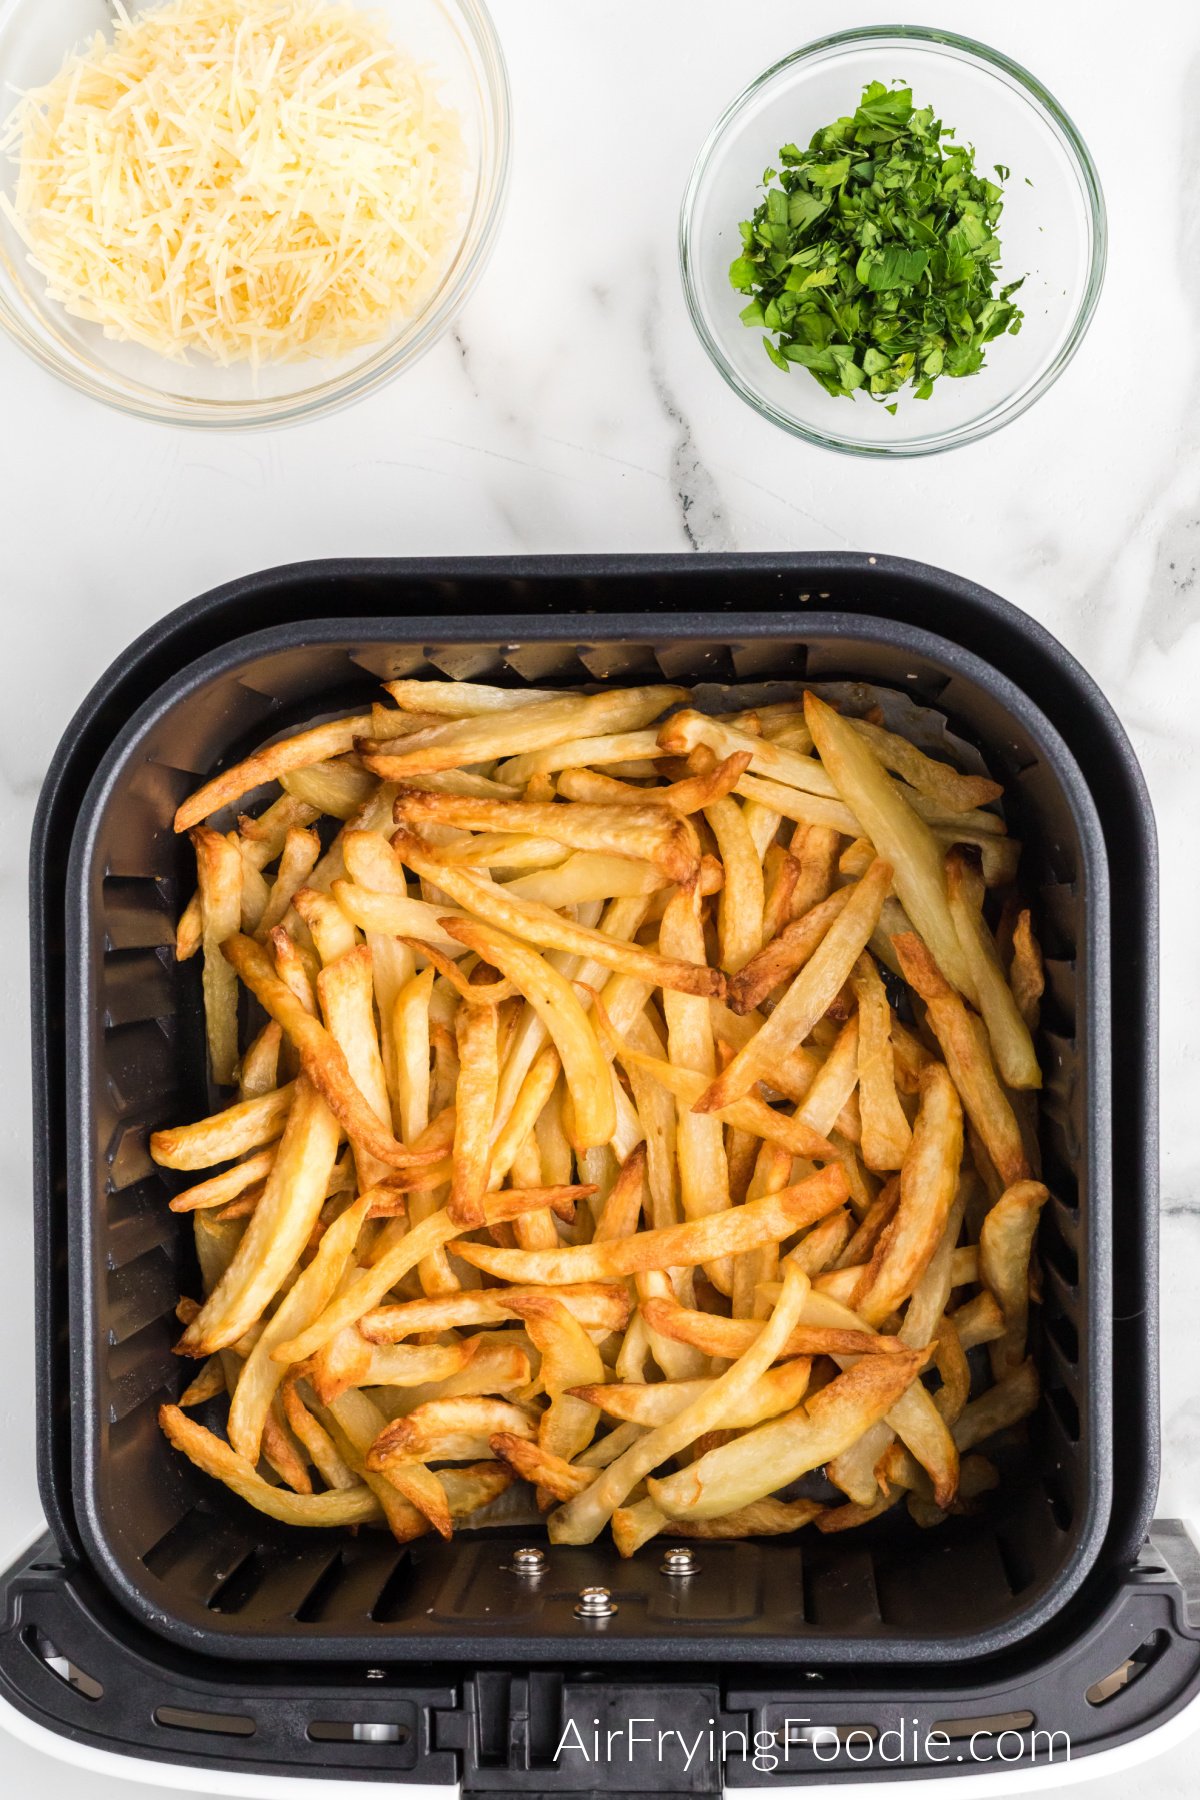 Truffle fries in the basket of the air fryer ready to be tossed with cheese and parsley.